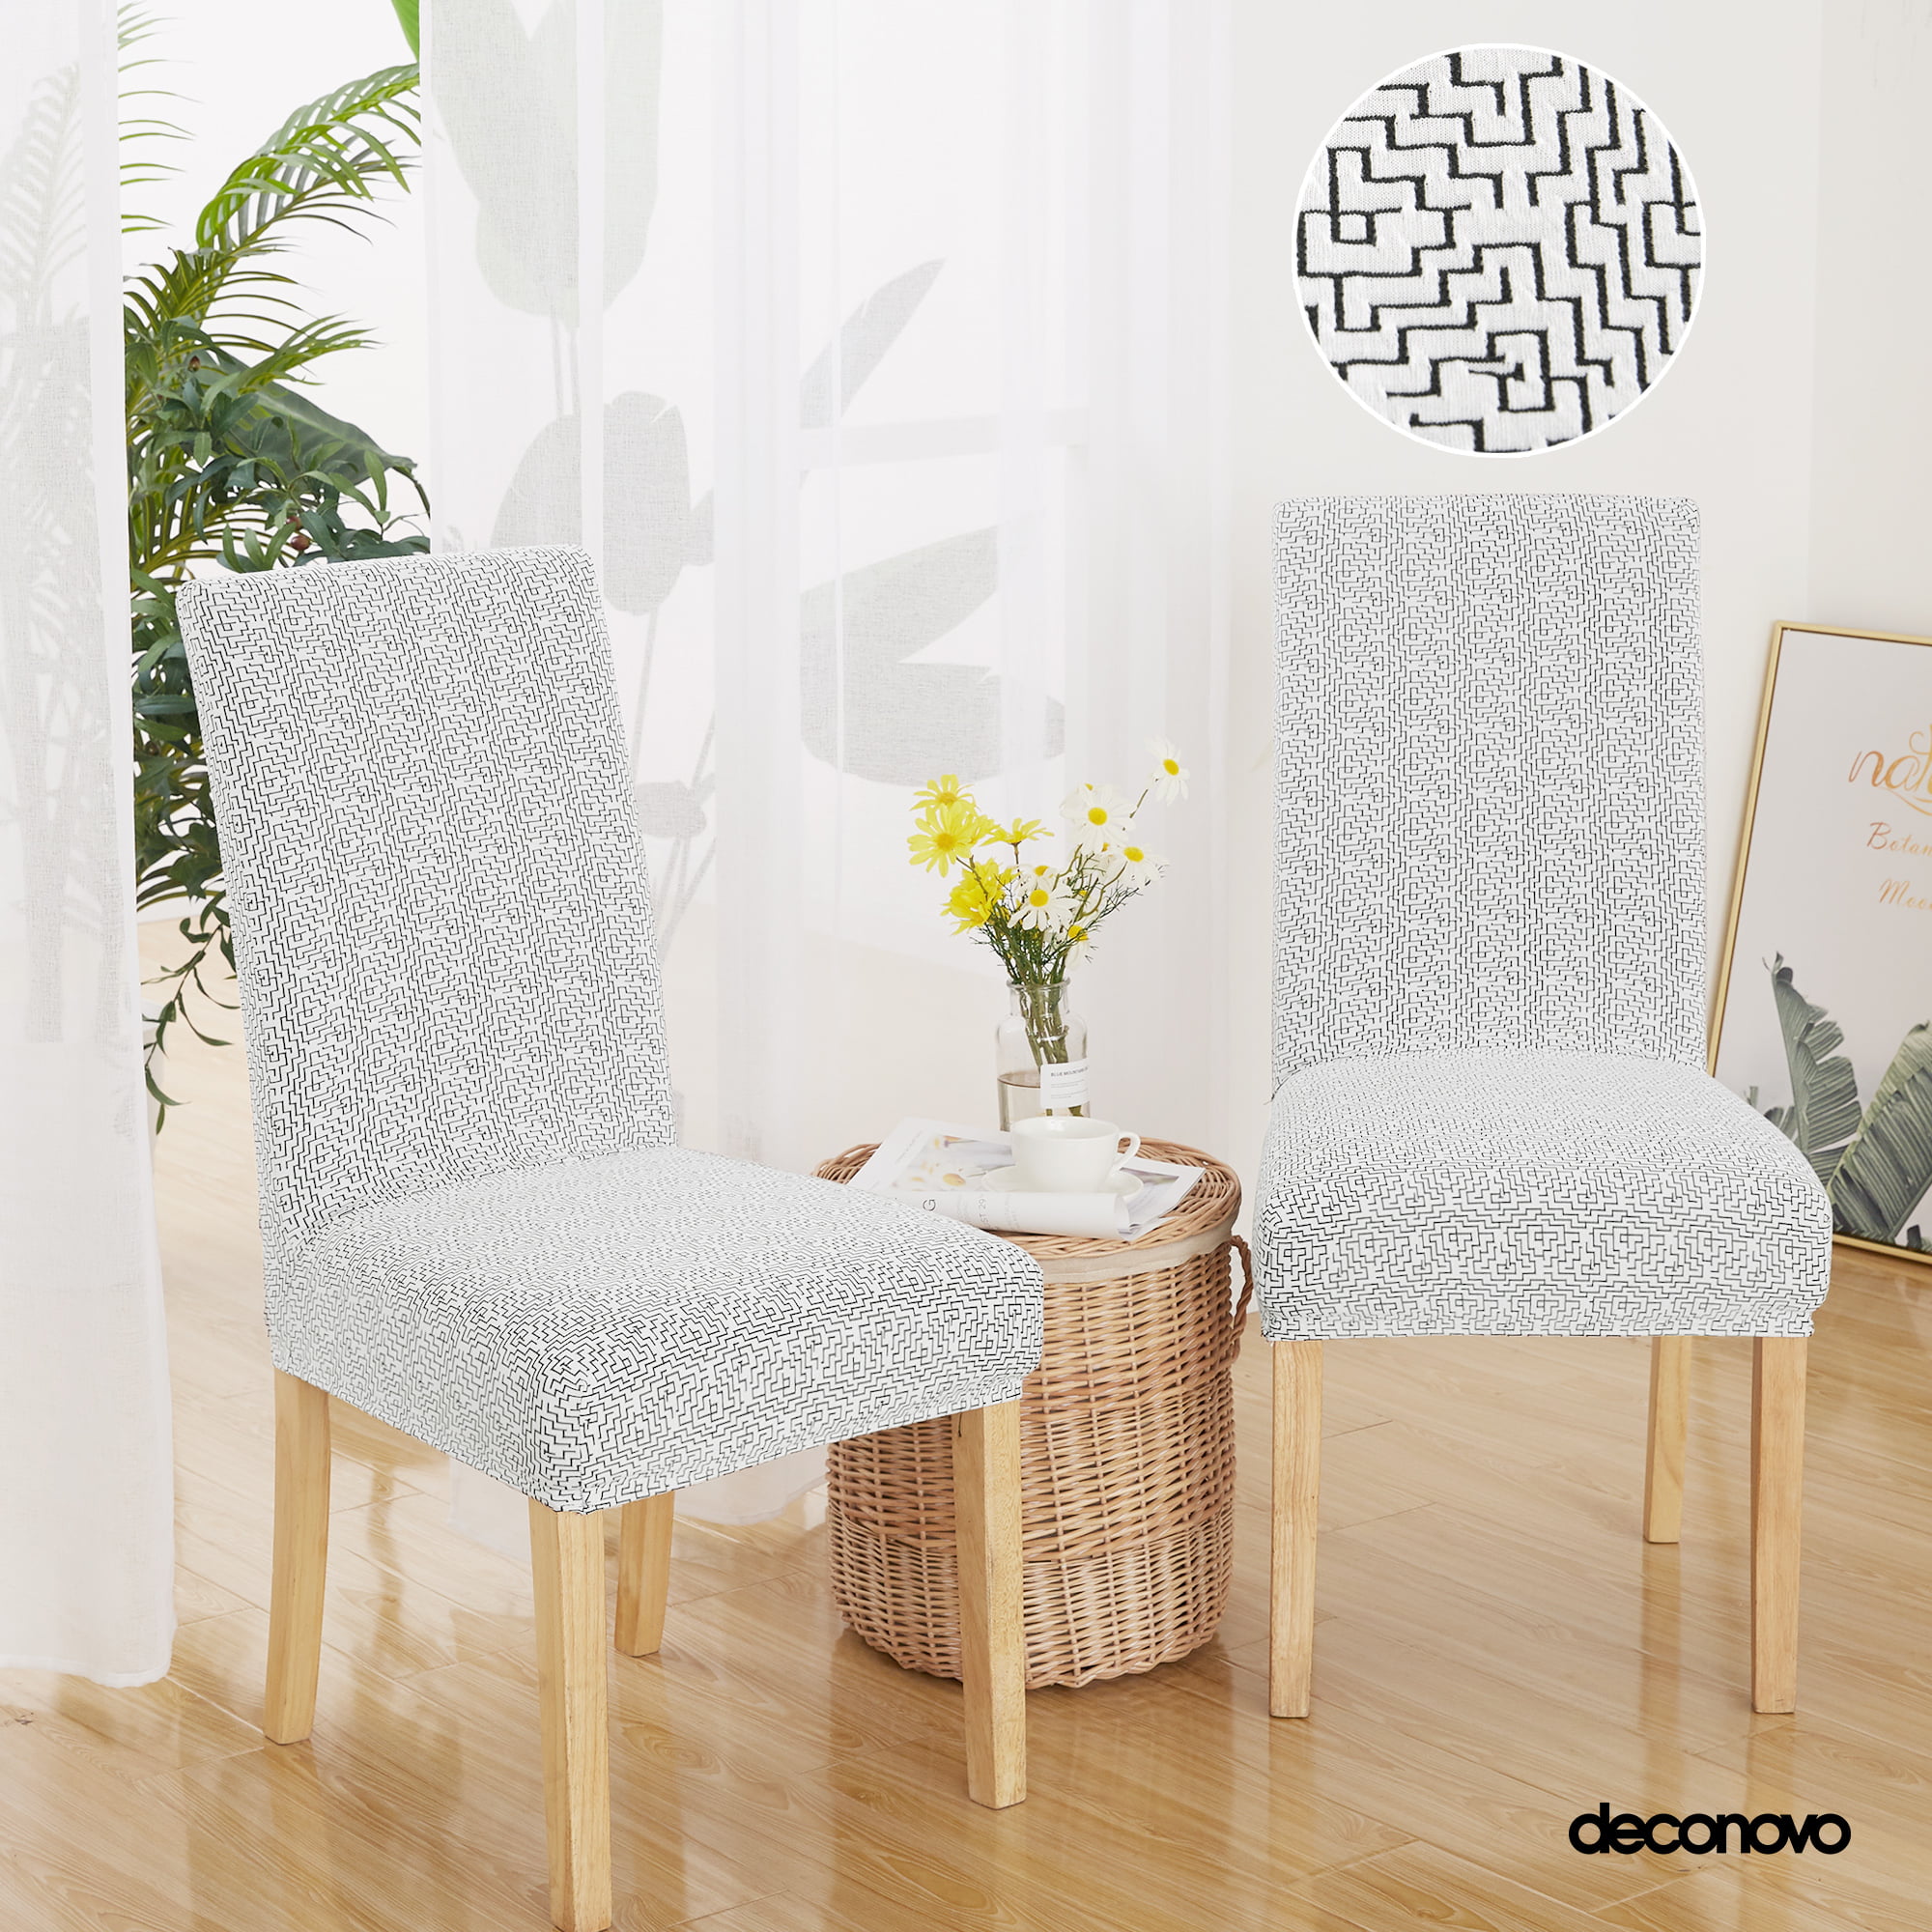 Details about   Deconovo Soft Knit Chair Cover Spandex Fabric Washable Removable Jacquard Seat S 